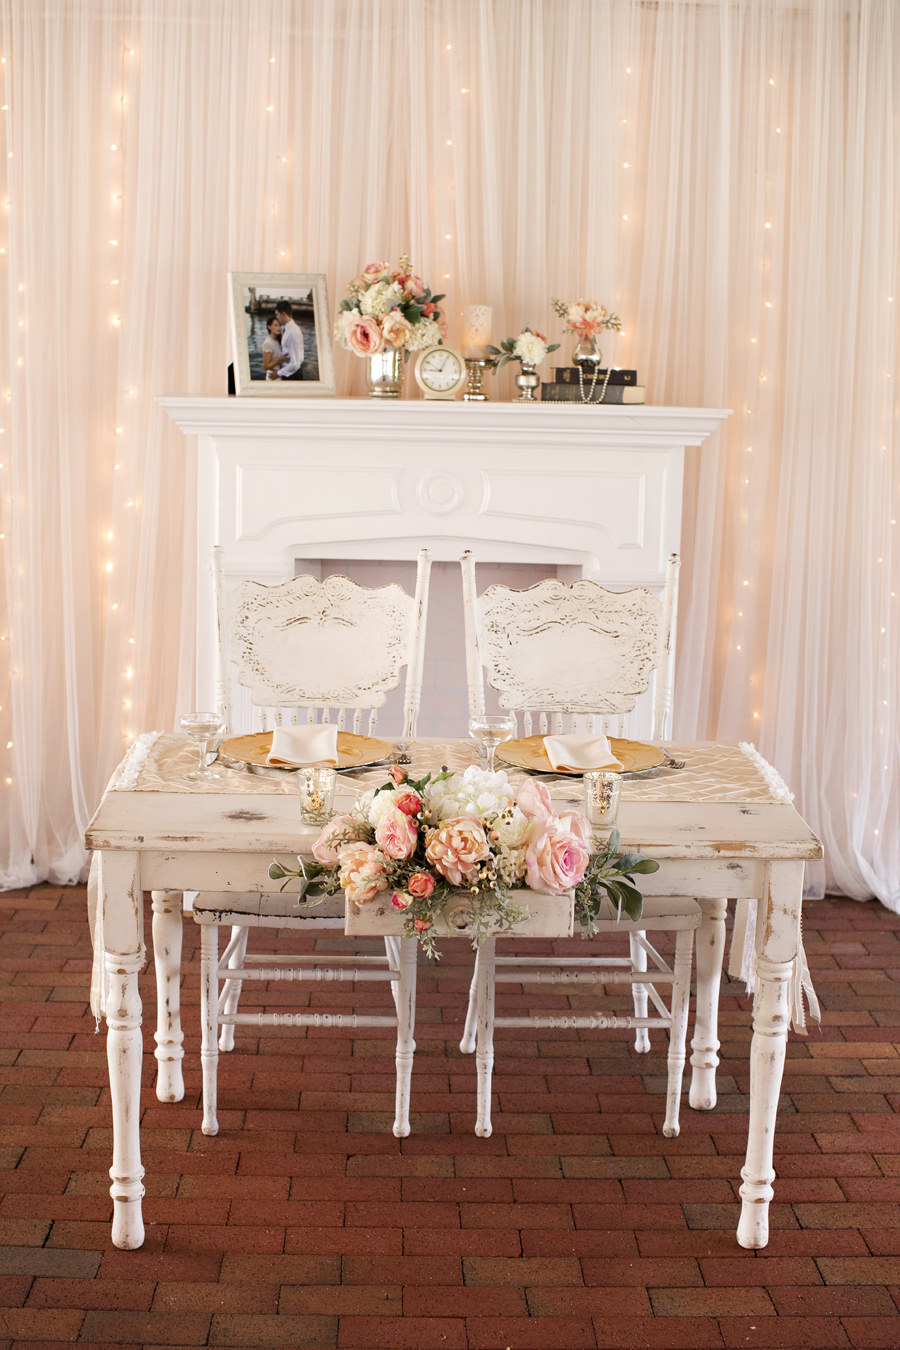 Ivory Gold and Pink Sweetheart Table with White Fireplace and Shabby Chic Vintage Accents | Rustic Wedding Reception Decor and Inspiration | Tampa Bay Wedding Venue Cross Creek Ranch